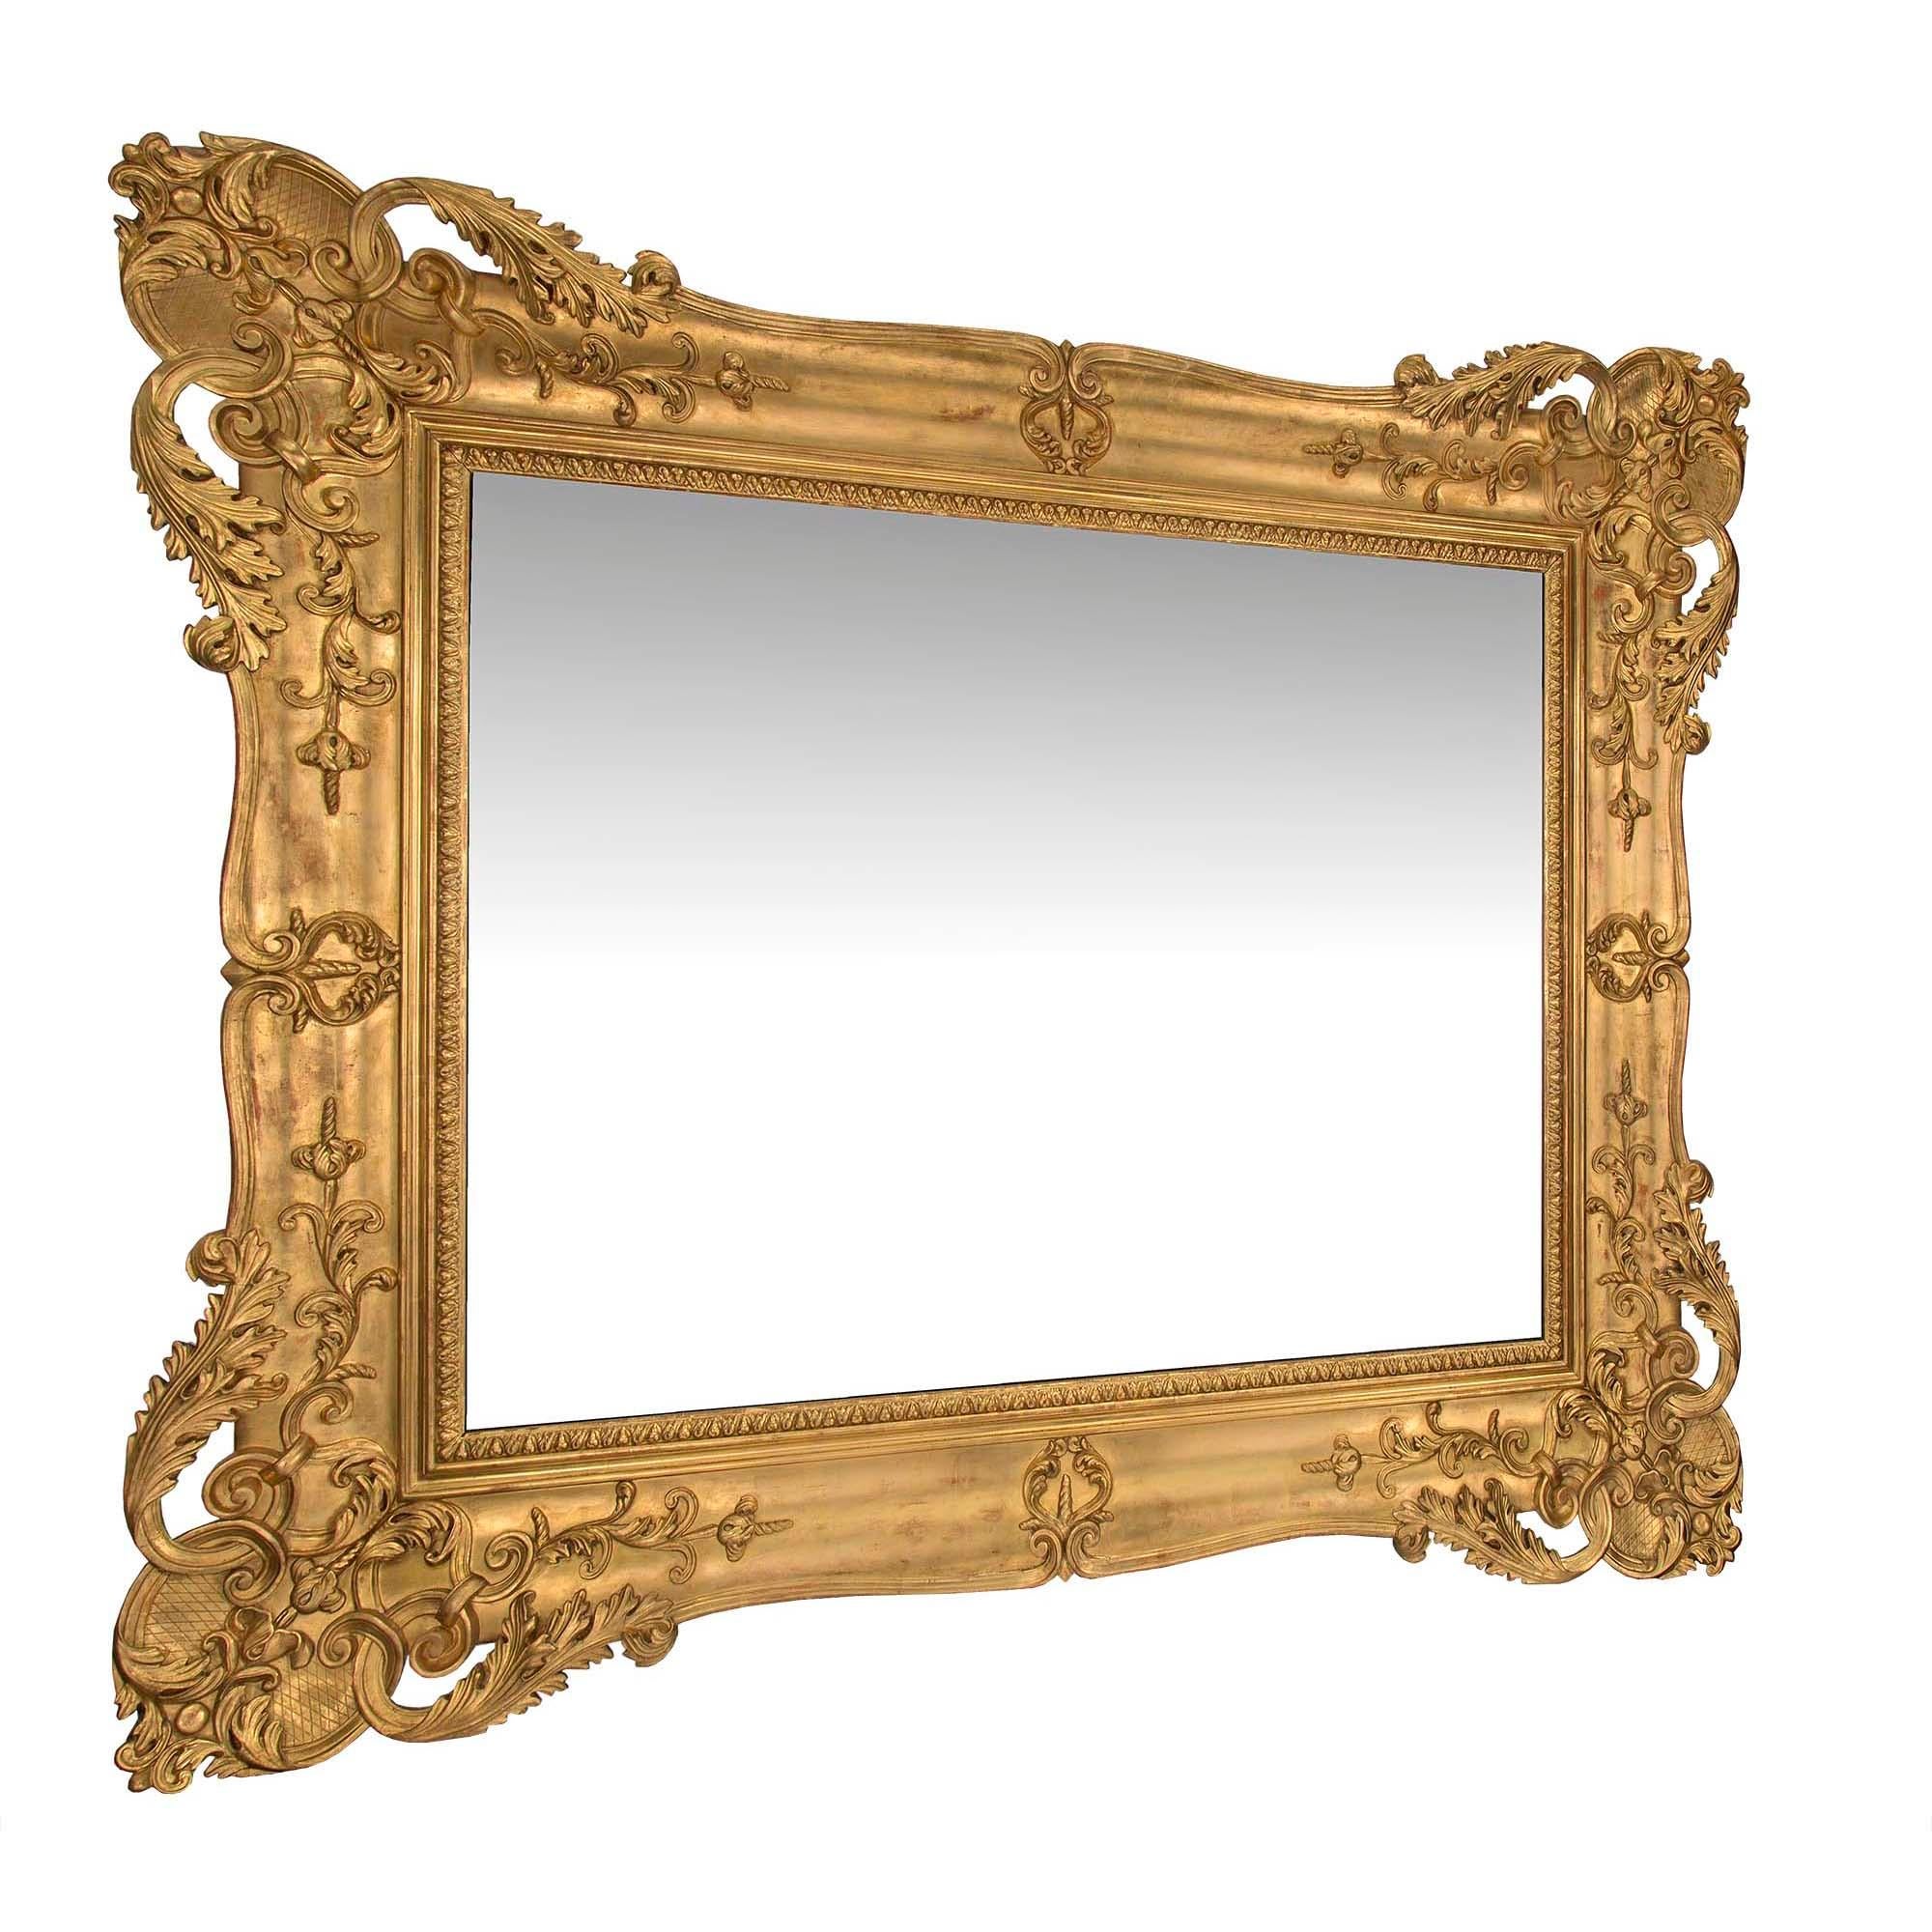 A stunning Italian mid 19th century Venetian rectangular mirror. The original mirror plate is framed within a most impressive giltwood border with a foliate motif and mottled design. The smooth frame displays a warm burnished finish with an